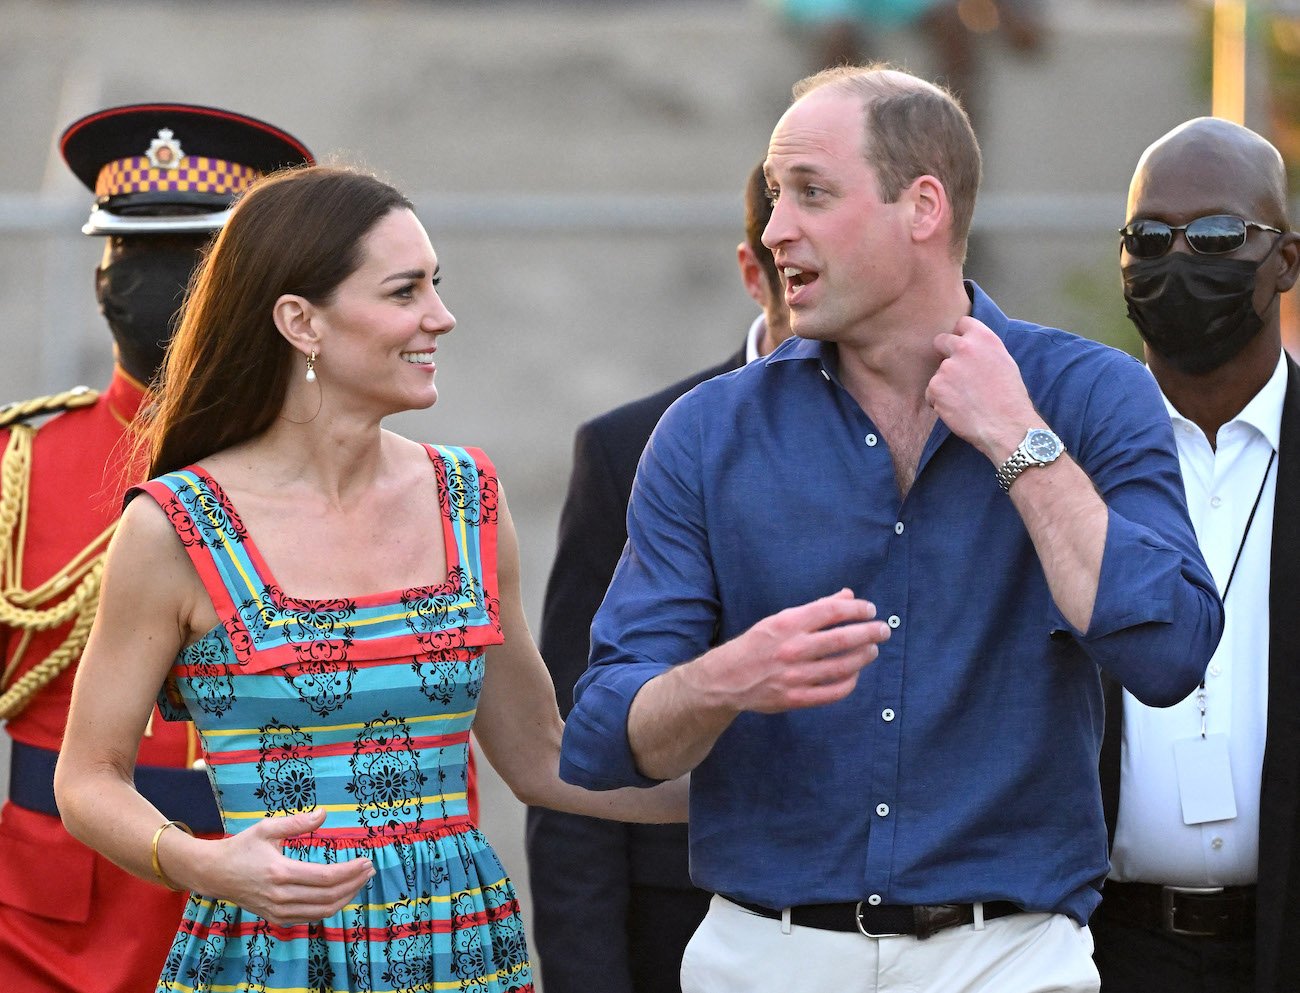 Kate Middleton wearing a colorful sleeveless dress and walking beside Prince William, who is wearing a blue button down shirt with white pants